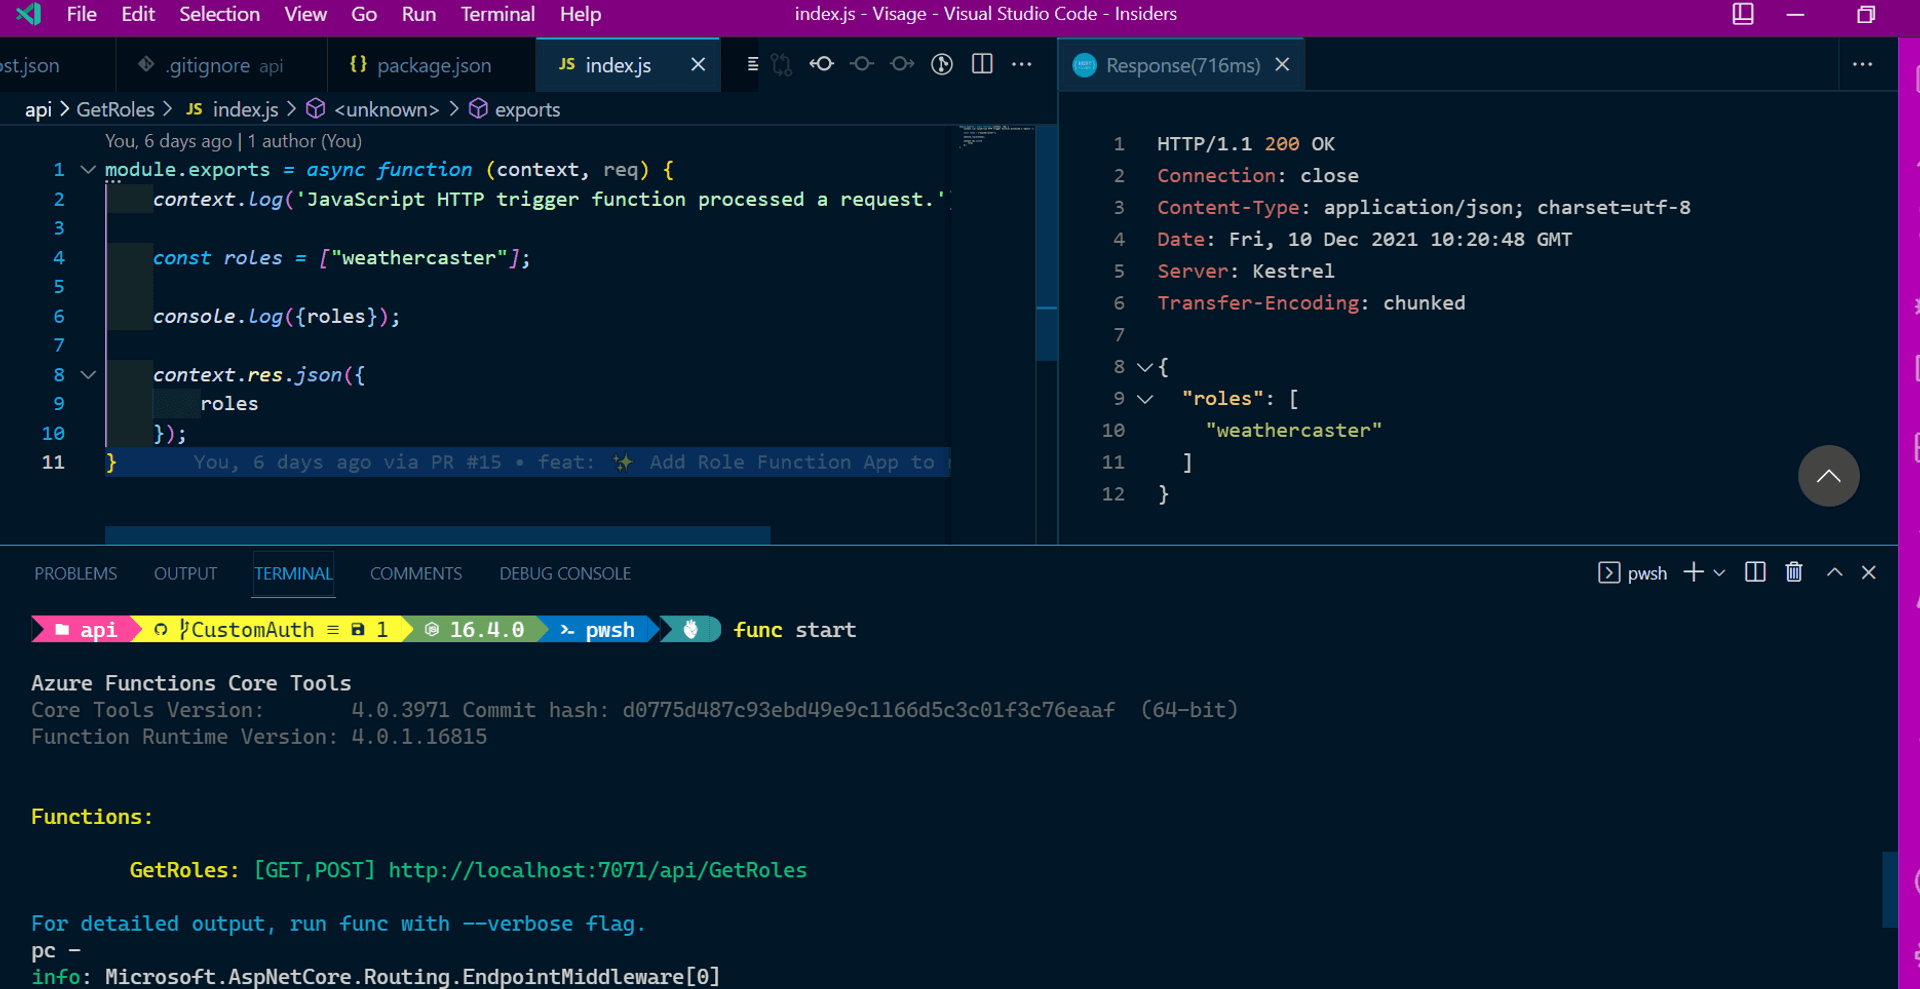 VS Code with the left tab showing the test payload, the right tab displaying the result returned from the Azure Function,and the bottom console displaying the log stream generated by the invoked Azure Function